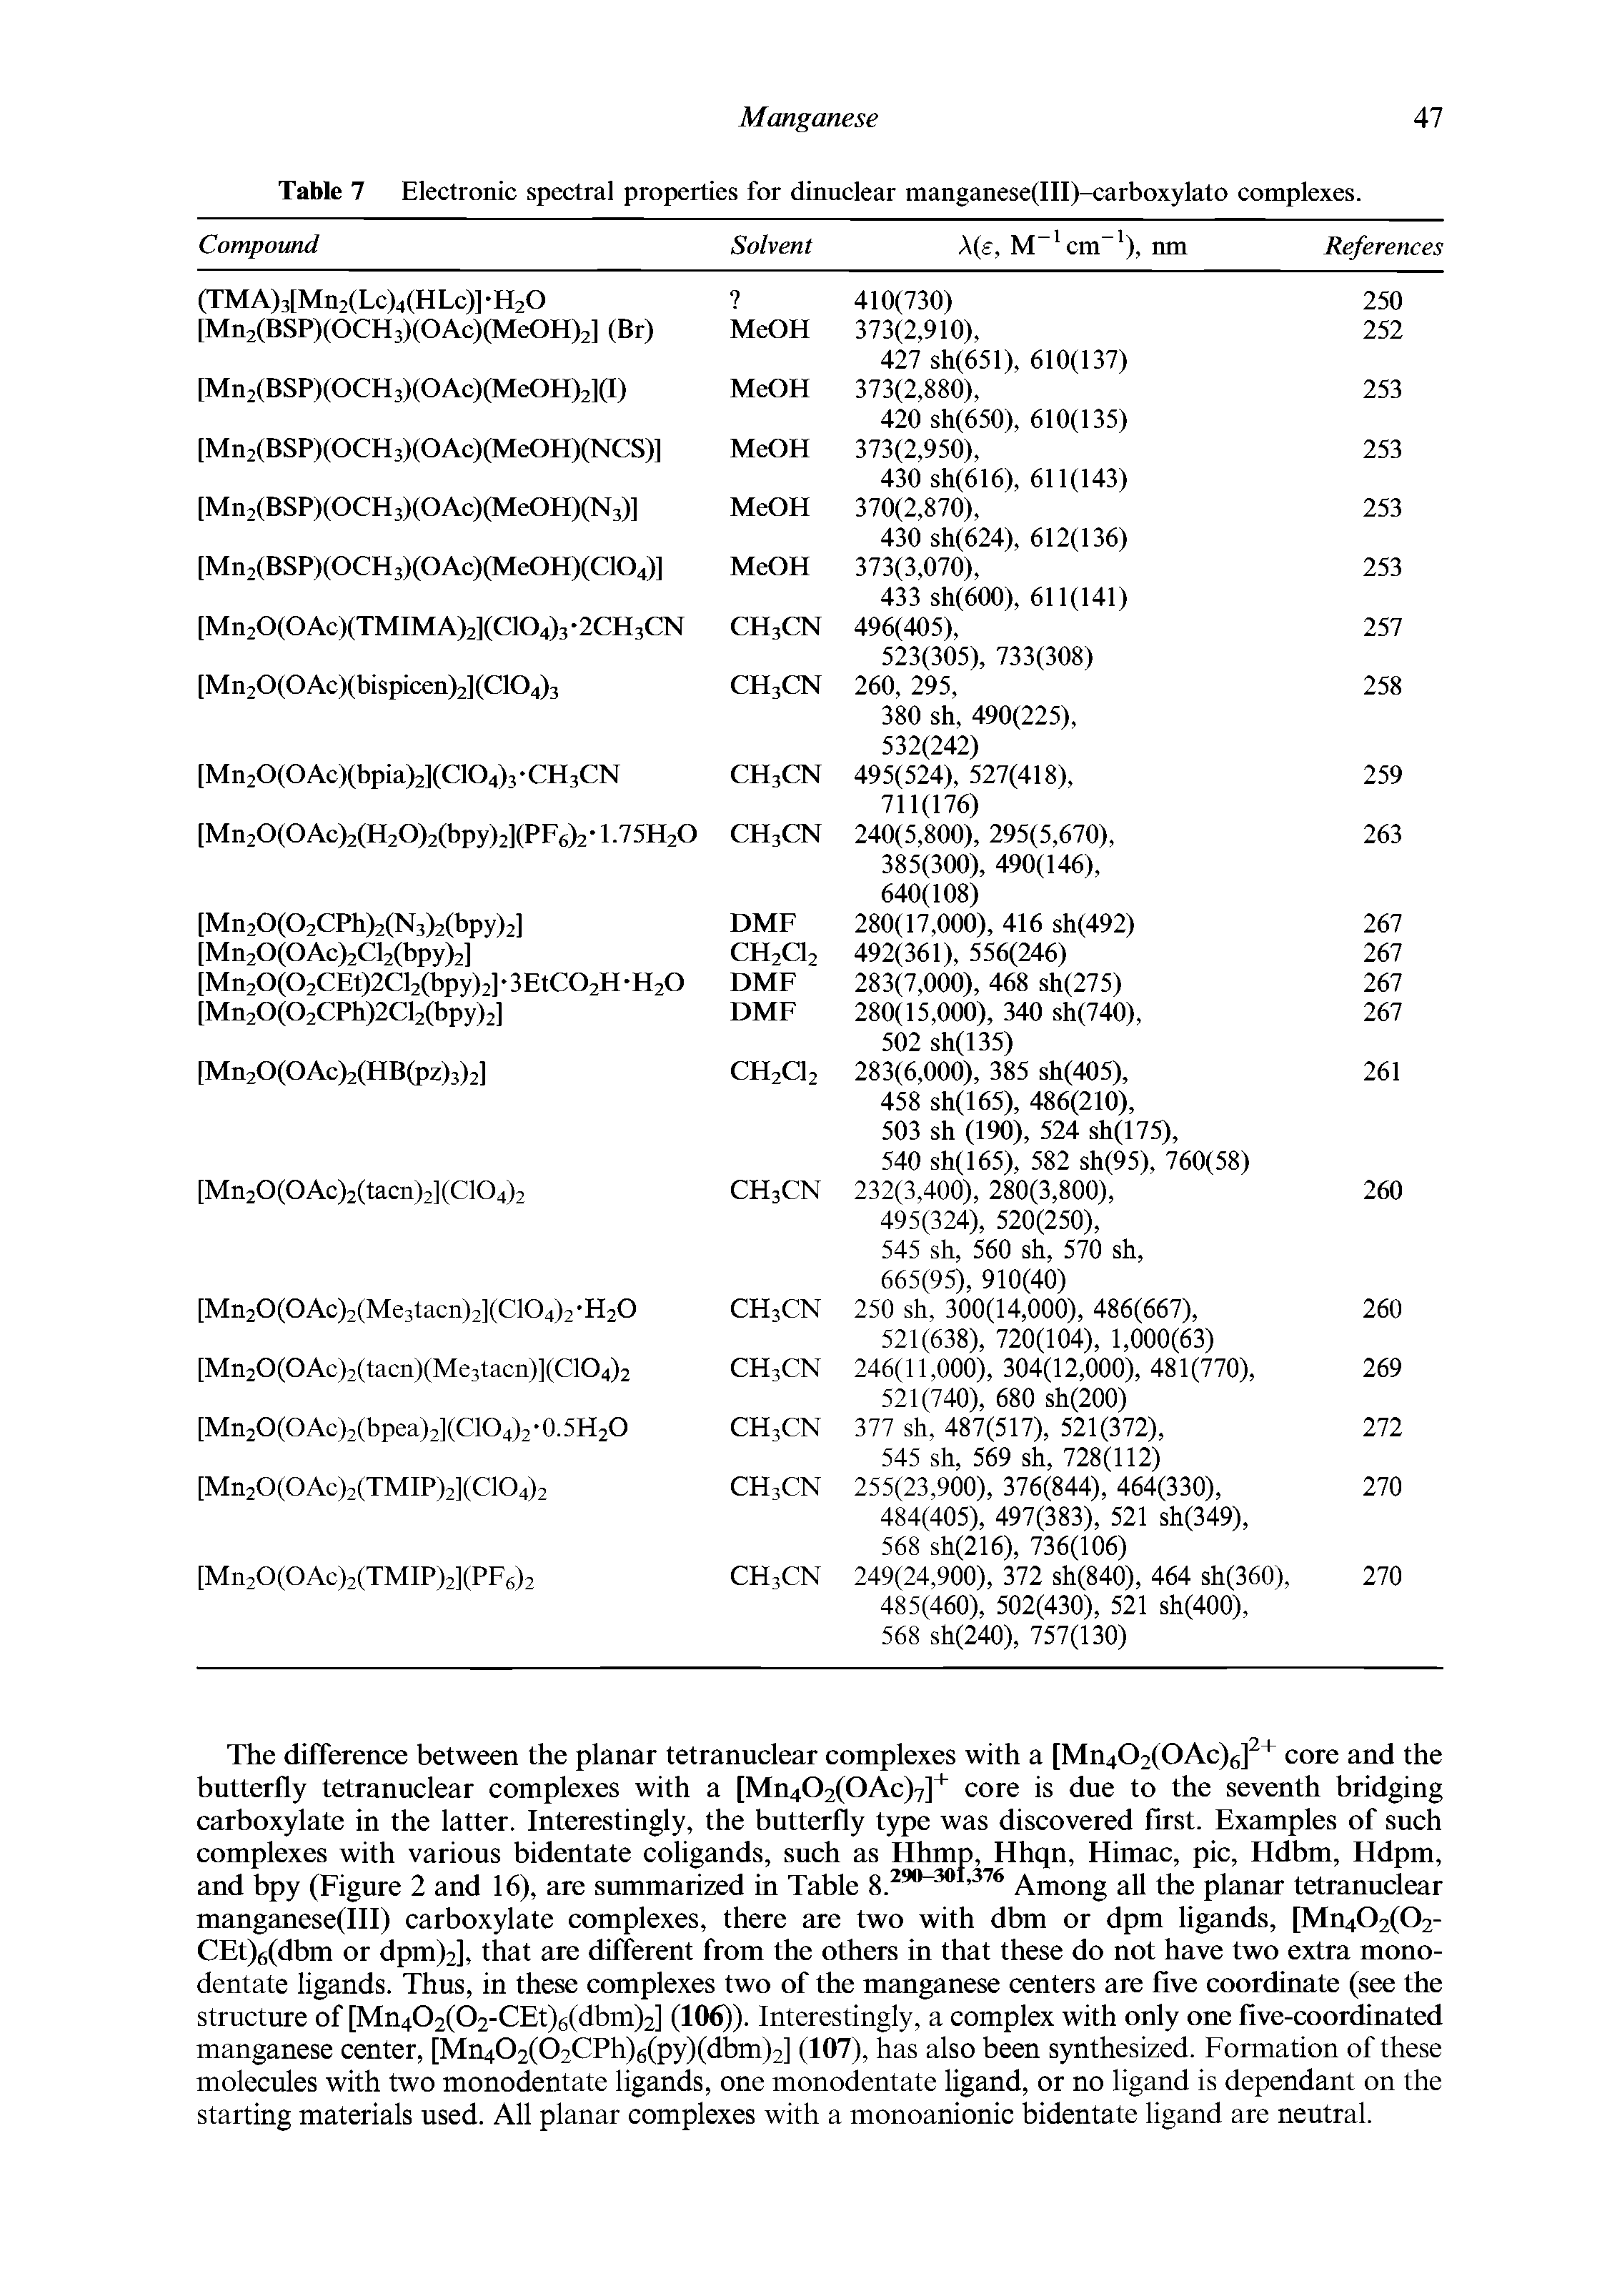 Table 7 Electronic spectral properties for dinuclear manganese(III)-carboxylato complexes.